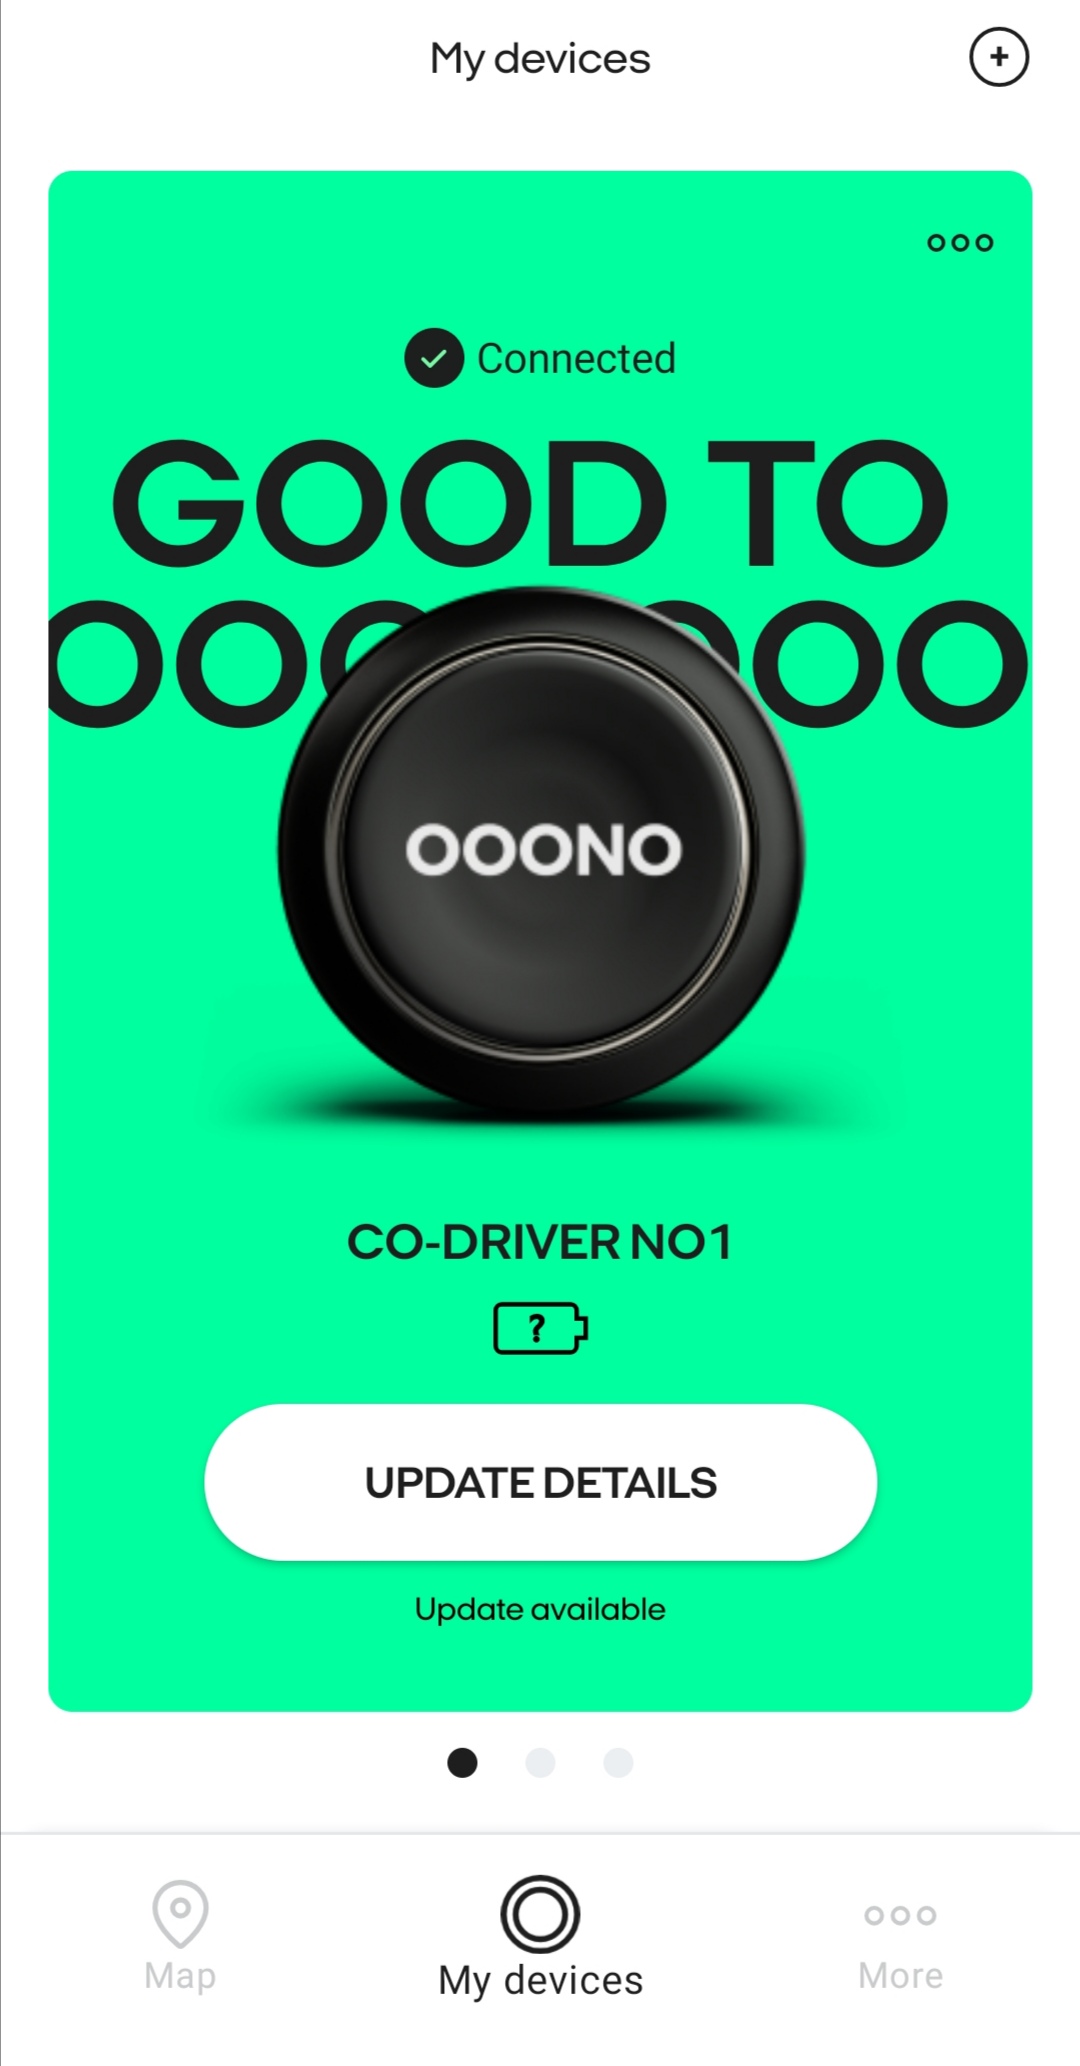 Updating the software  CO-DRIVER NO1 – OOONO